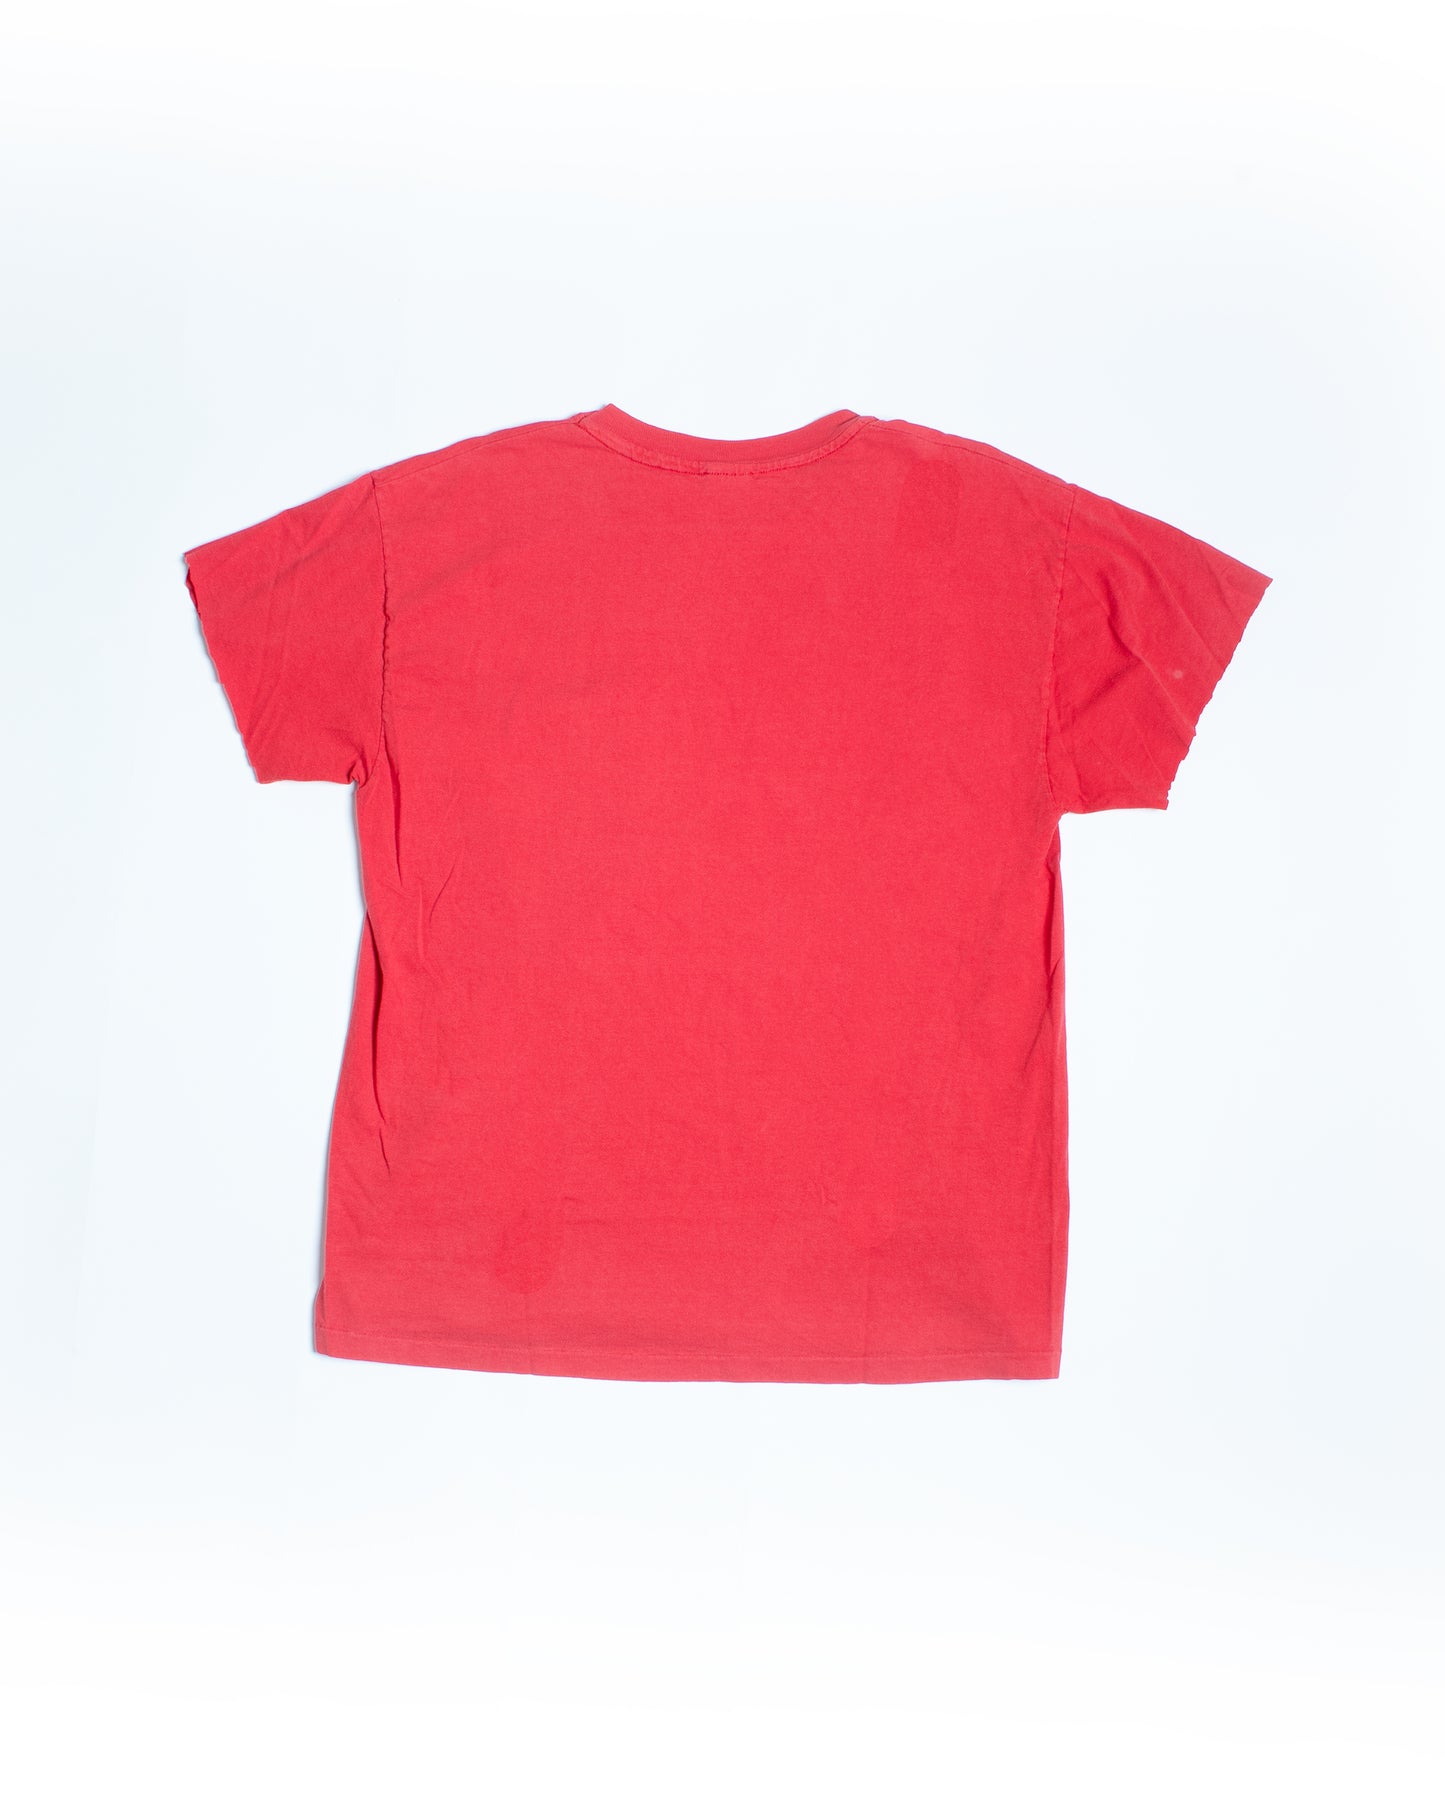 1980's Red Hanes Pocket Tee